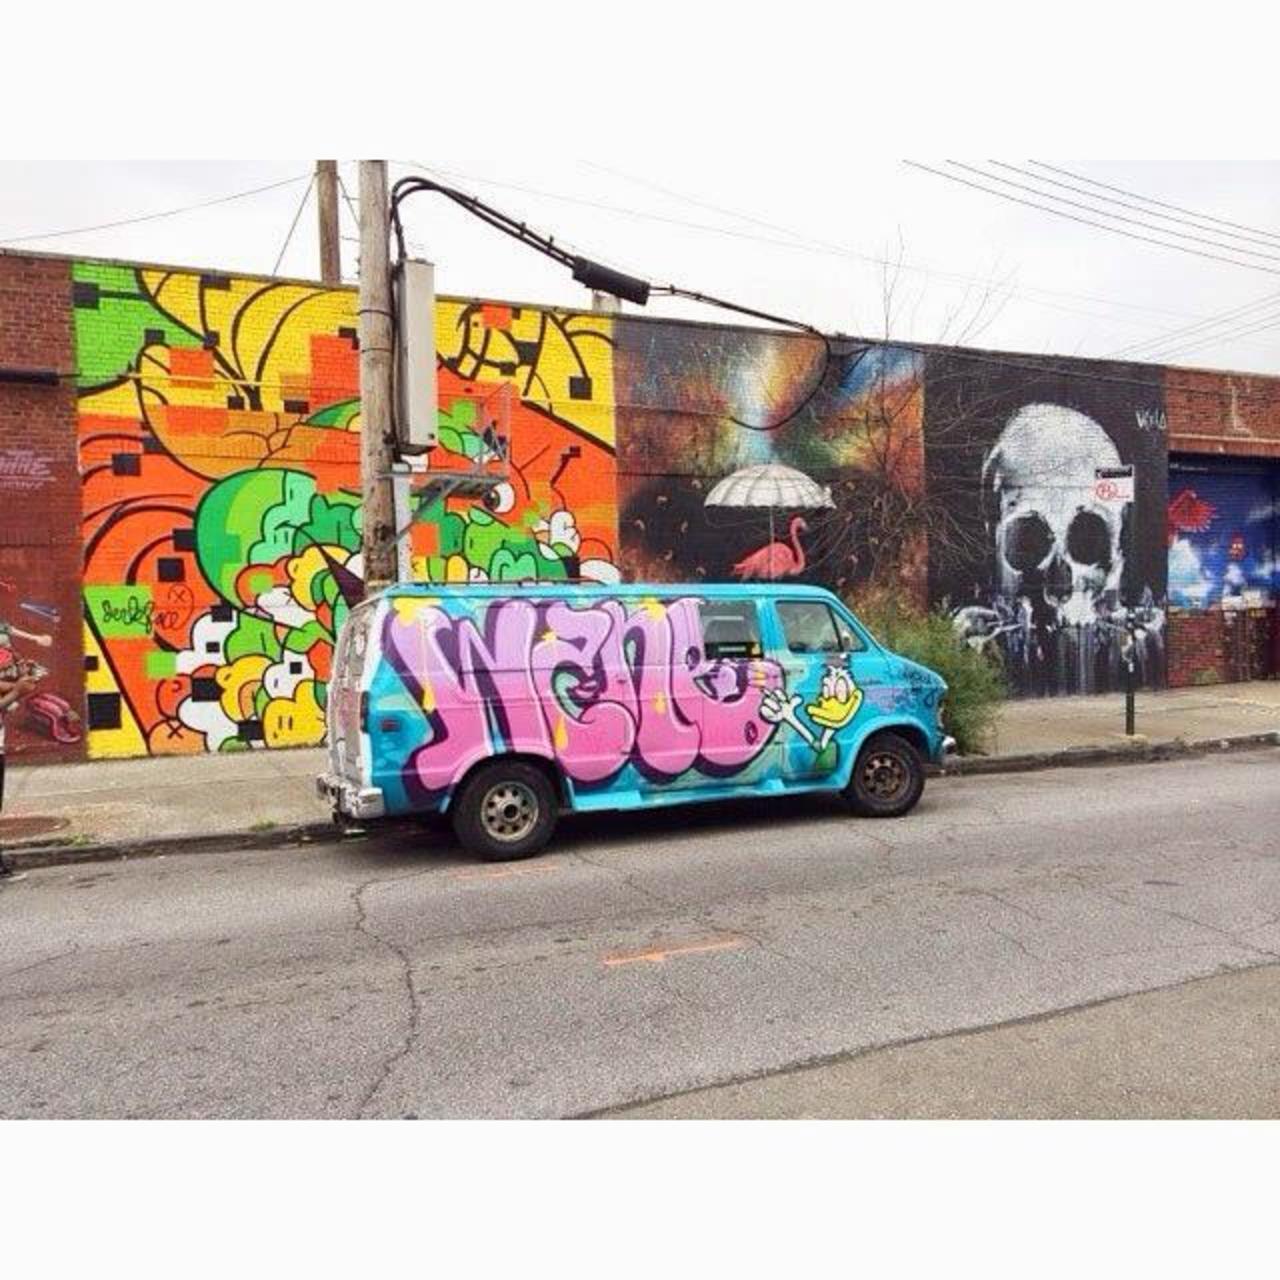 I saw this van in #brooklyn . Does anyone know of the #artist ? #streetart #graffiti http://t.co/FznWYxlRjH